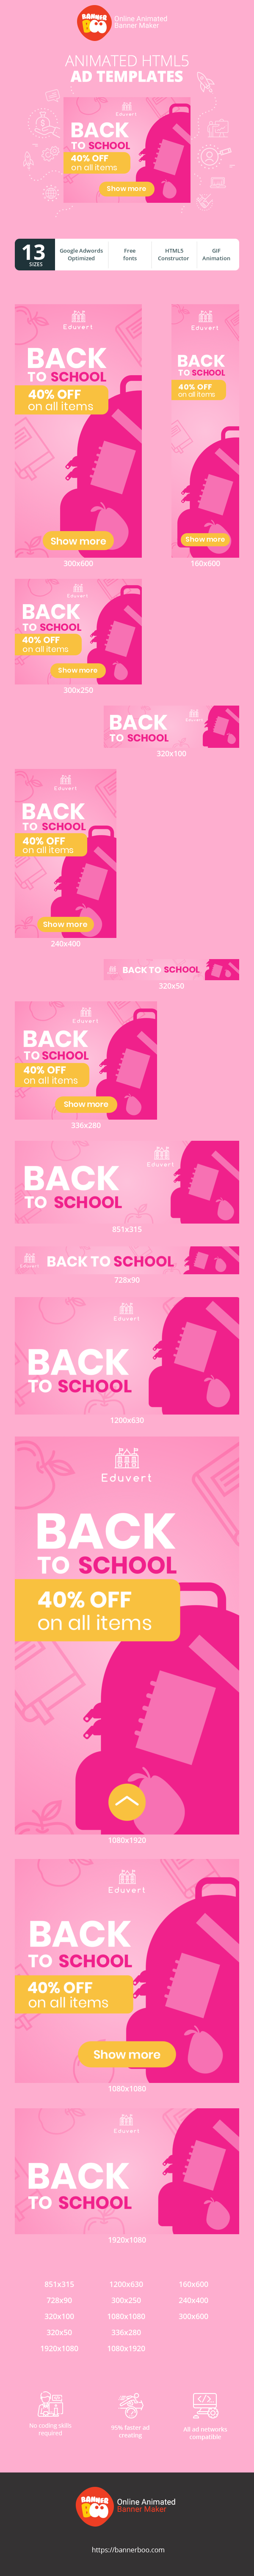 Banner ad template — Back To School — 40% Off All Items